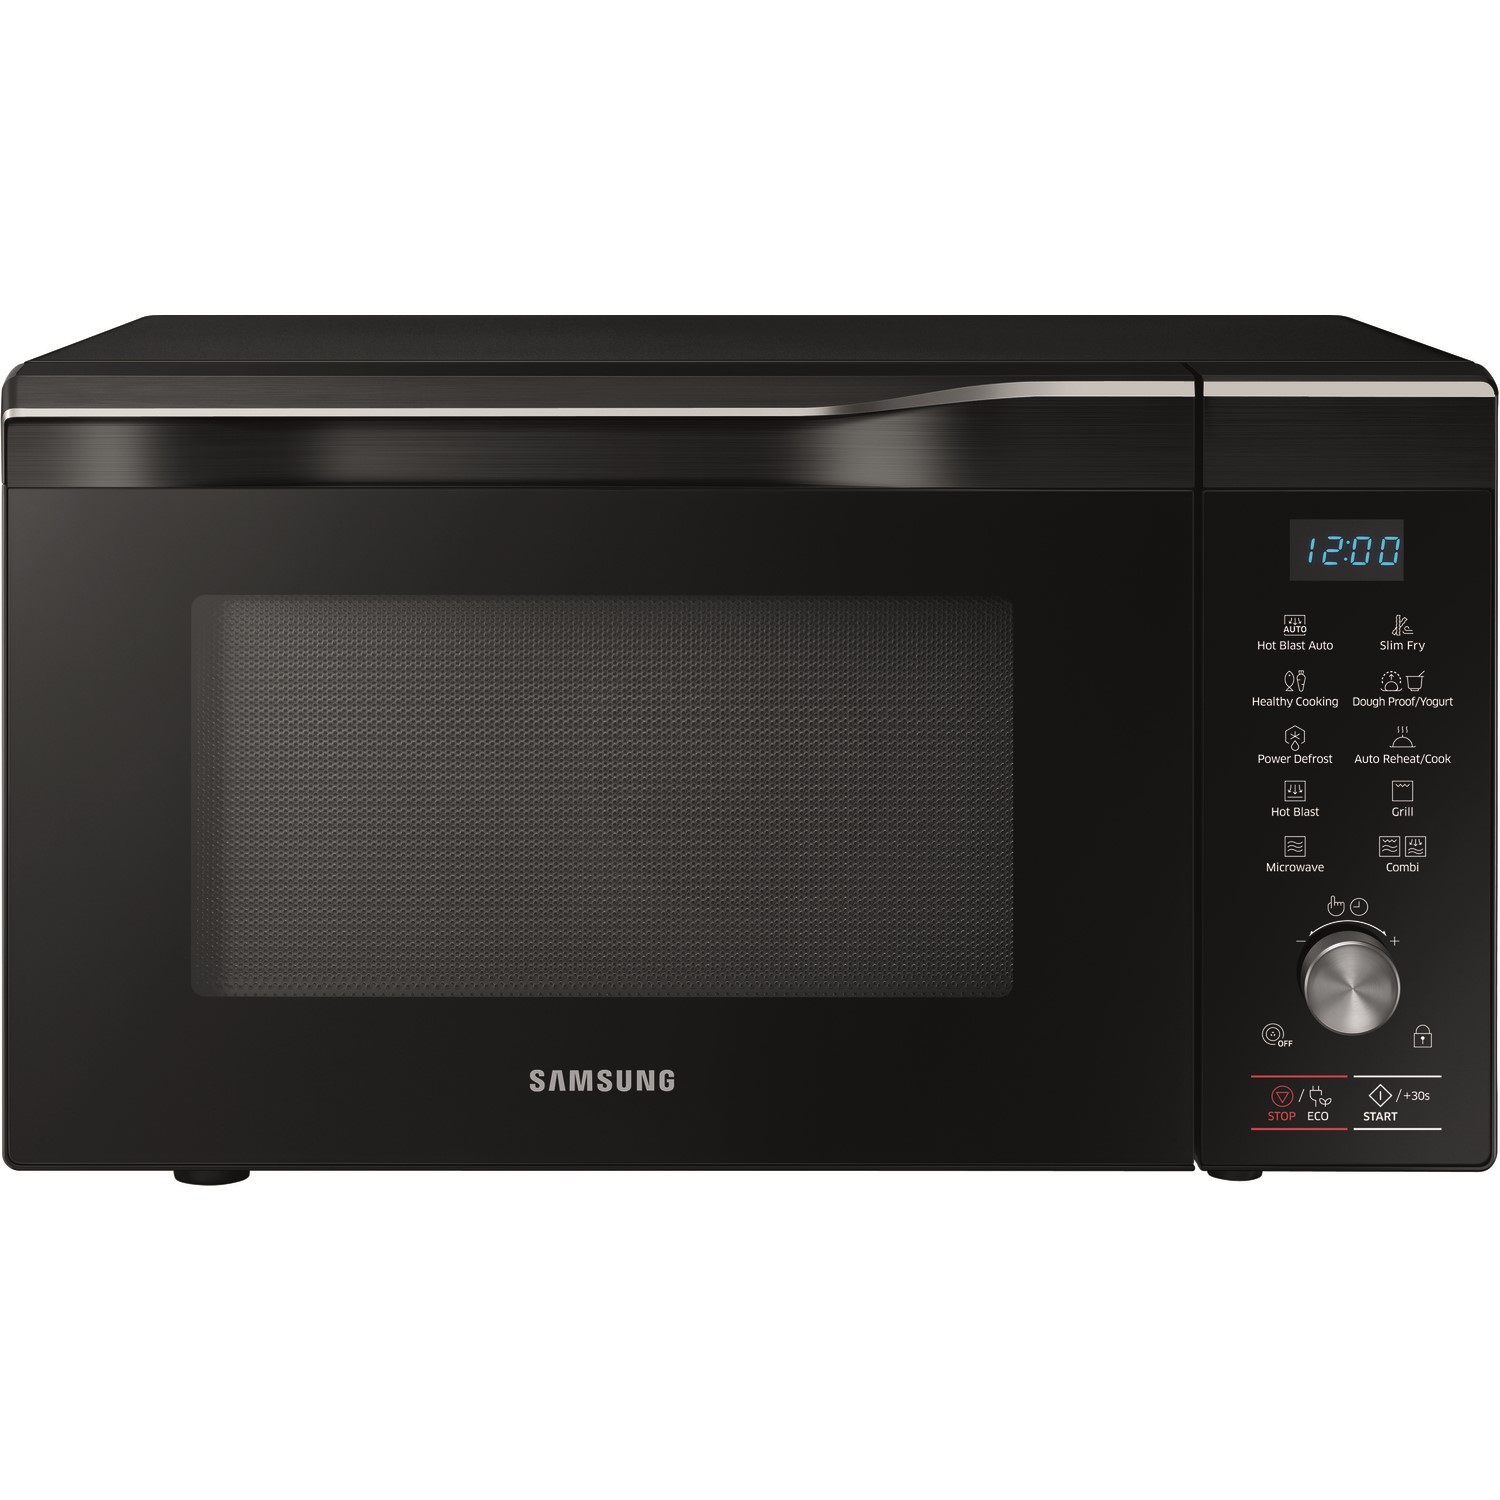 Samsung 32L Combination Microwave Oven - Black